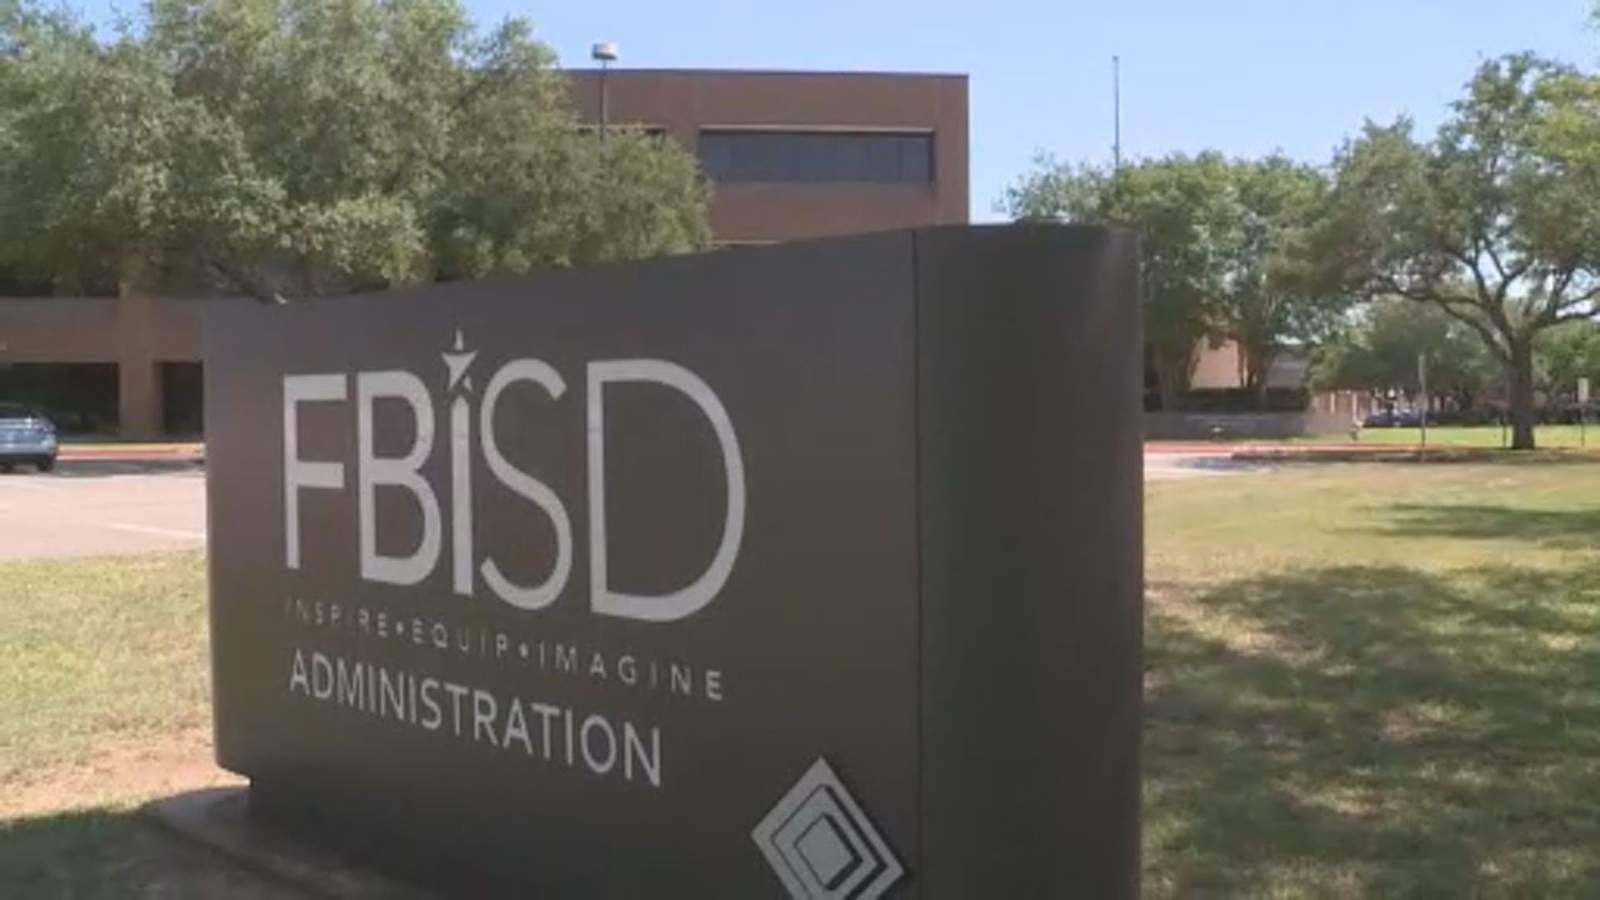 Fort Bend ISD calls this week’s guidance from TEA for 2020-2021 school year ‘disappointing'